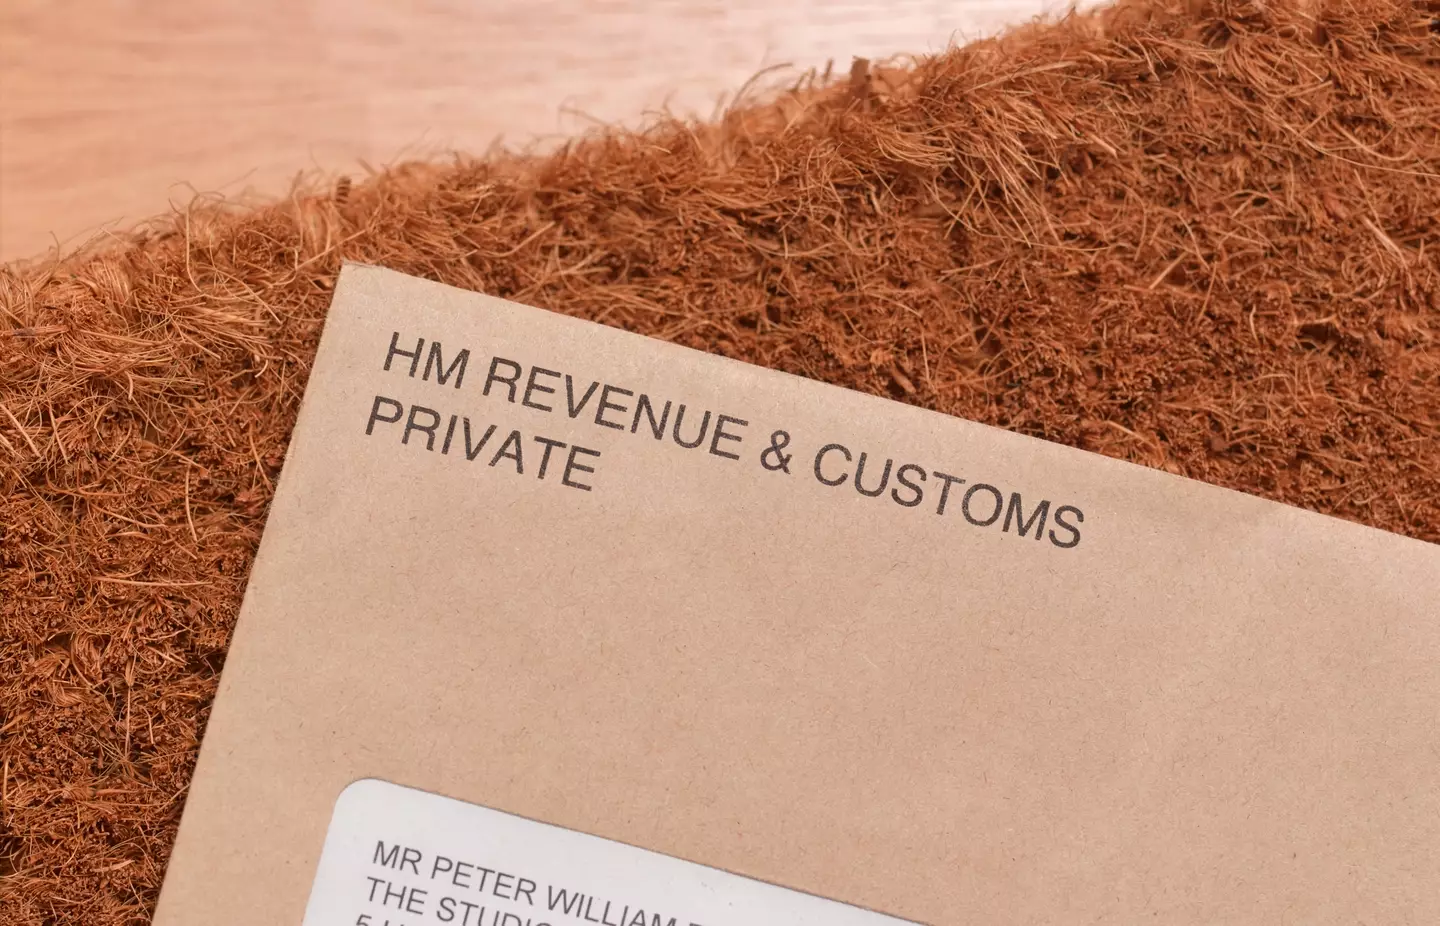 Martin Lewis has told people to keep an eye out for an HMRC letter.